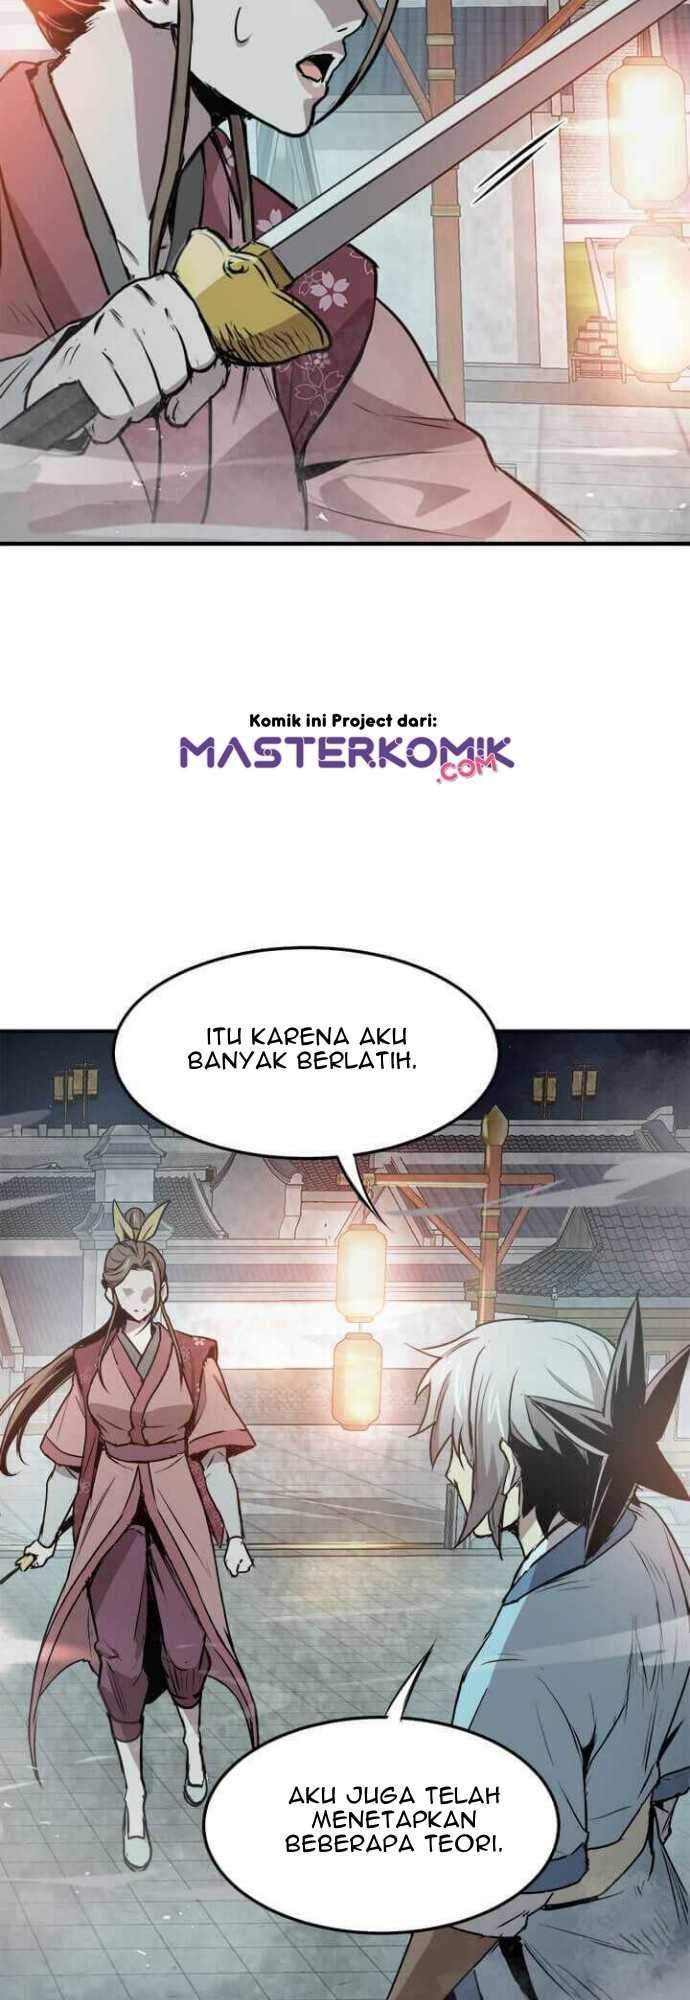 Strongest Fighter Chapter 34